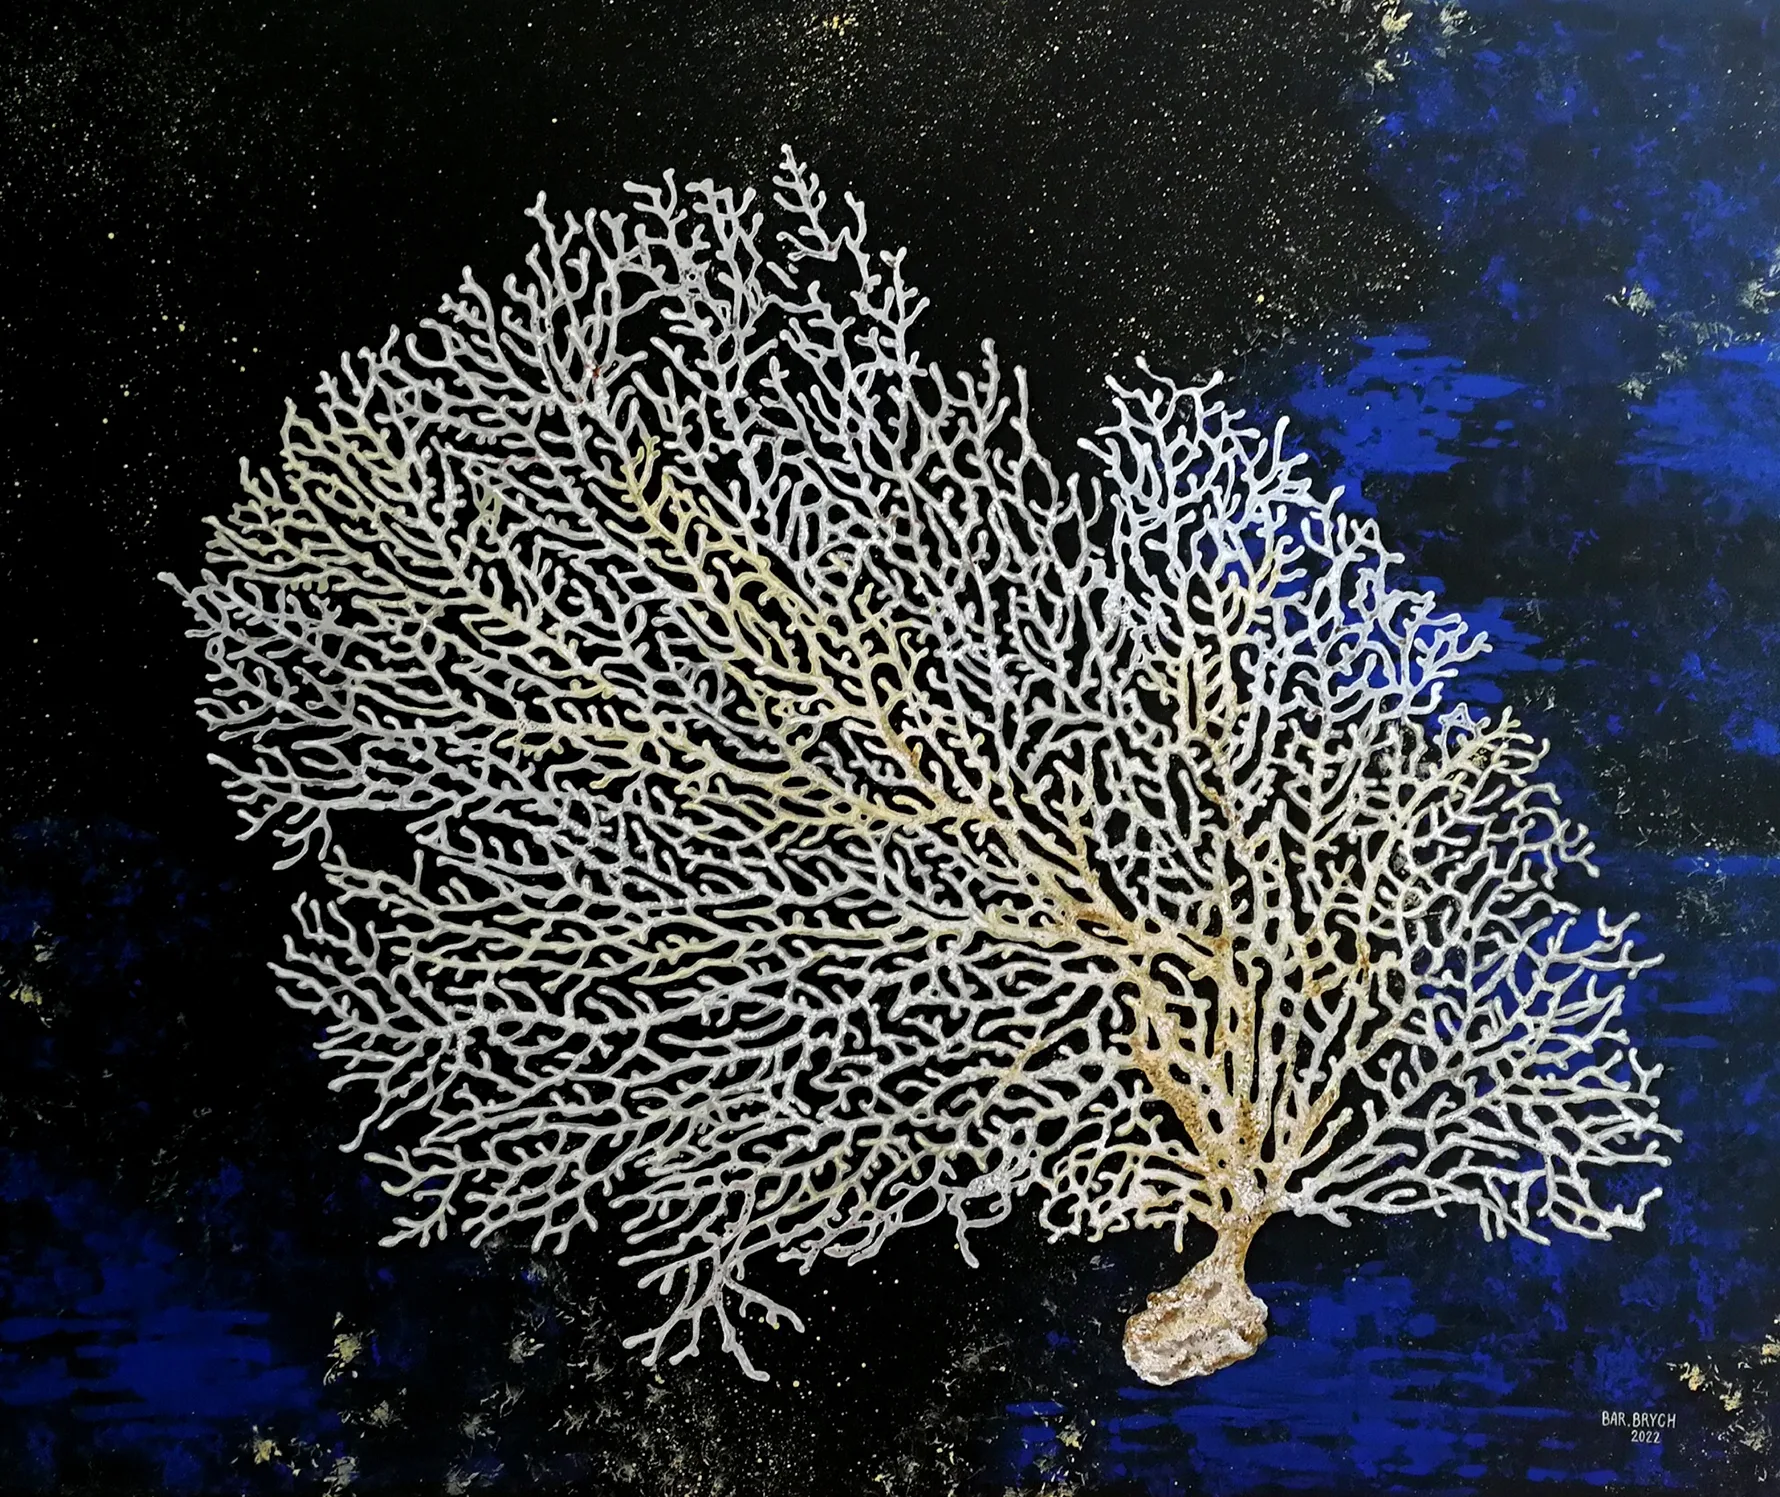 The painting called Movement Lapis Lazuli, depicting a coral reef, measuring 120x100 cm, made in 2022 using acrylic technique